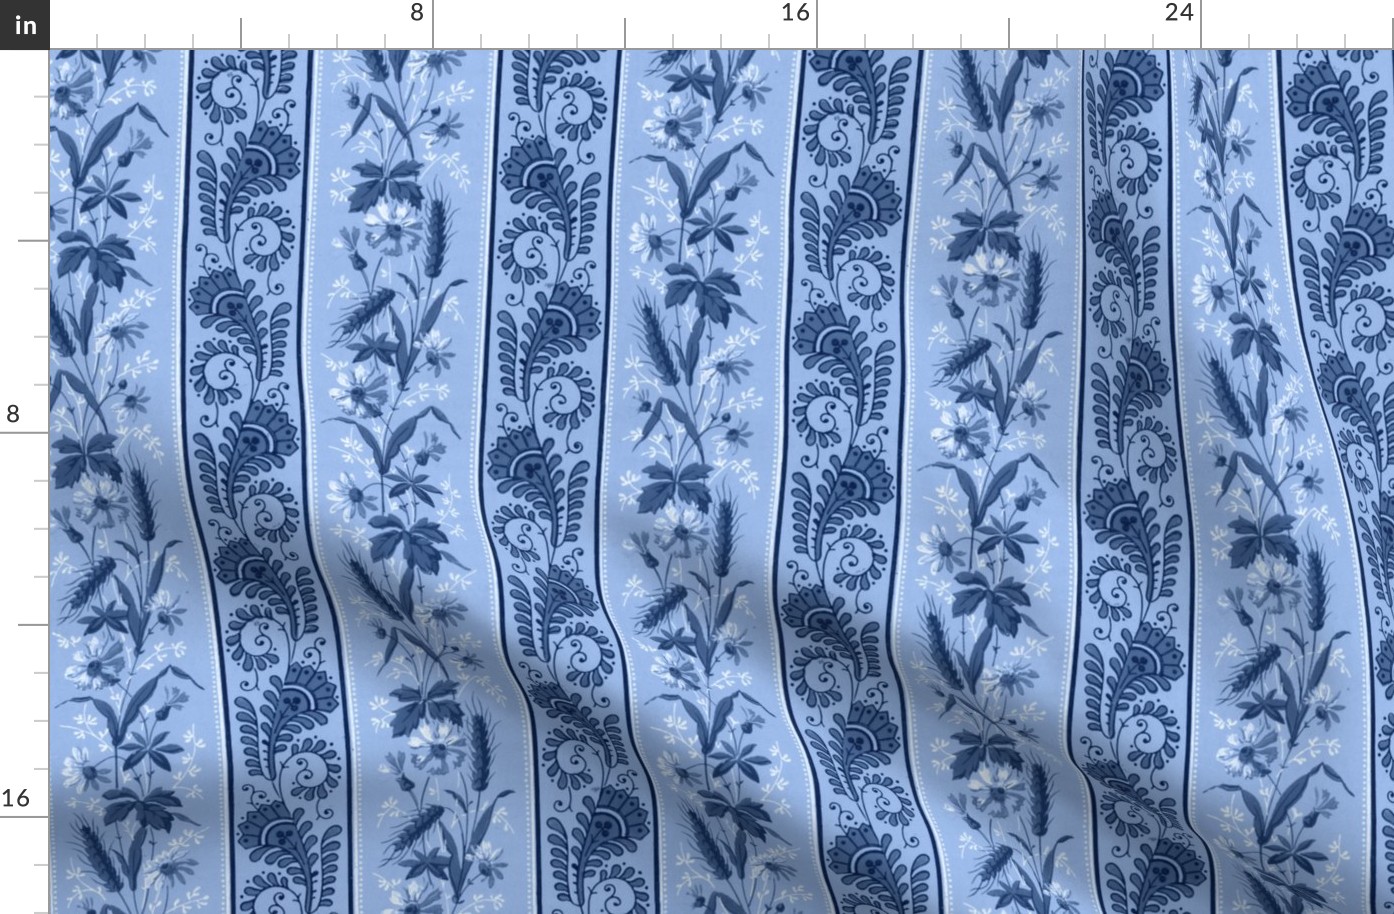 1880 Vintage Victorian and Art Nouveau Floral Stripes - Small Scale - in Wedgewood Blue